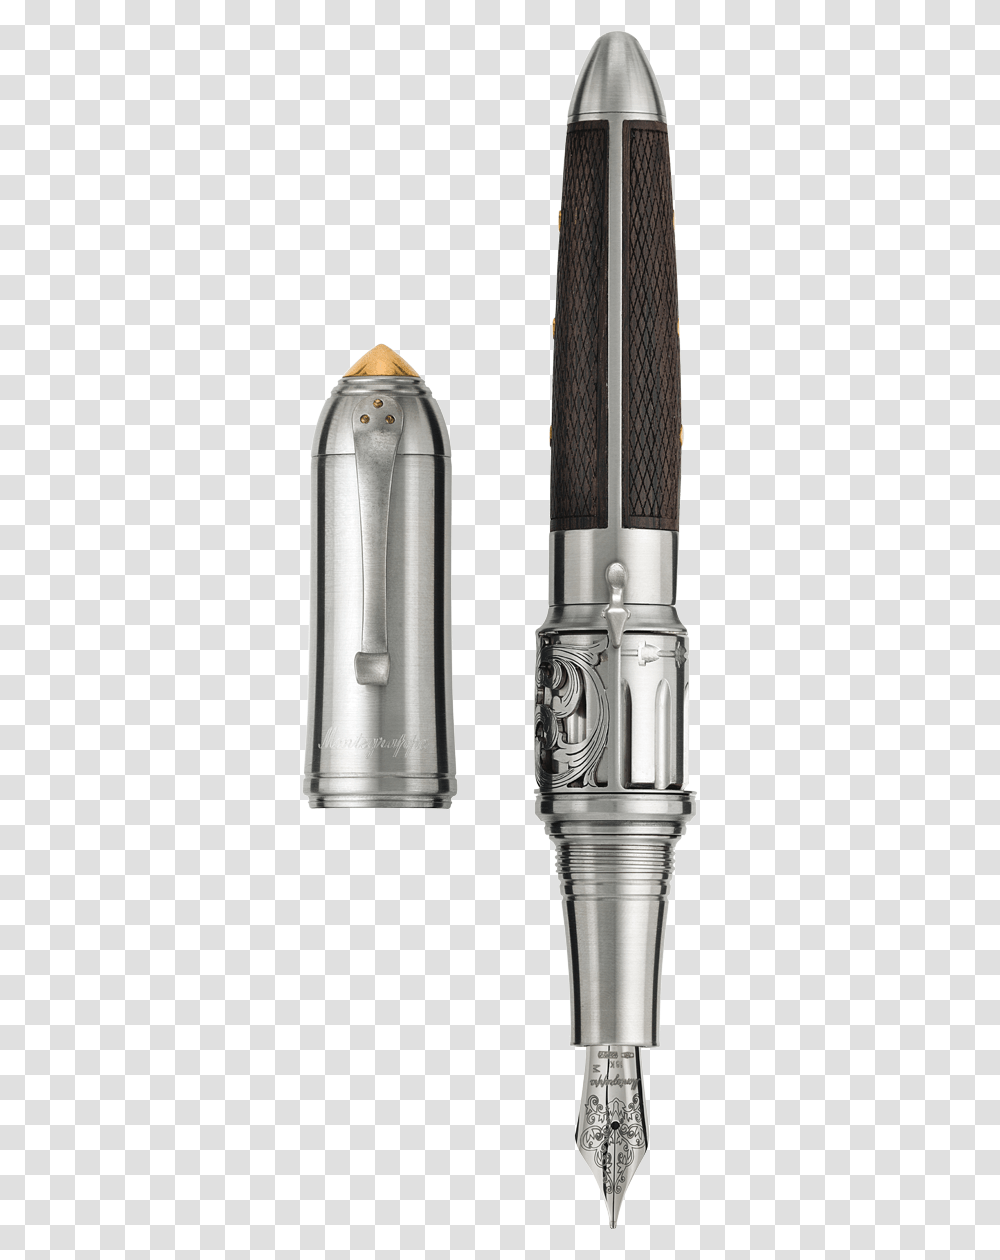 Revolver Fountain Pen Montegrappa Revolver Pen, Lamp, Flashlight, Cylinder, Microphone Transparent Png